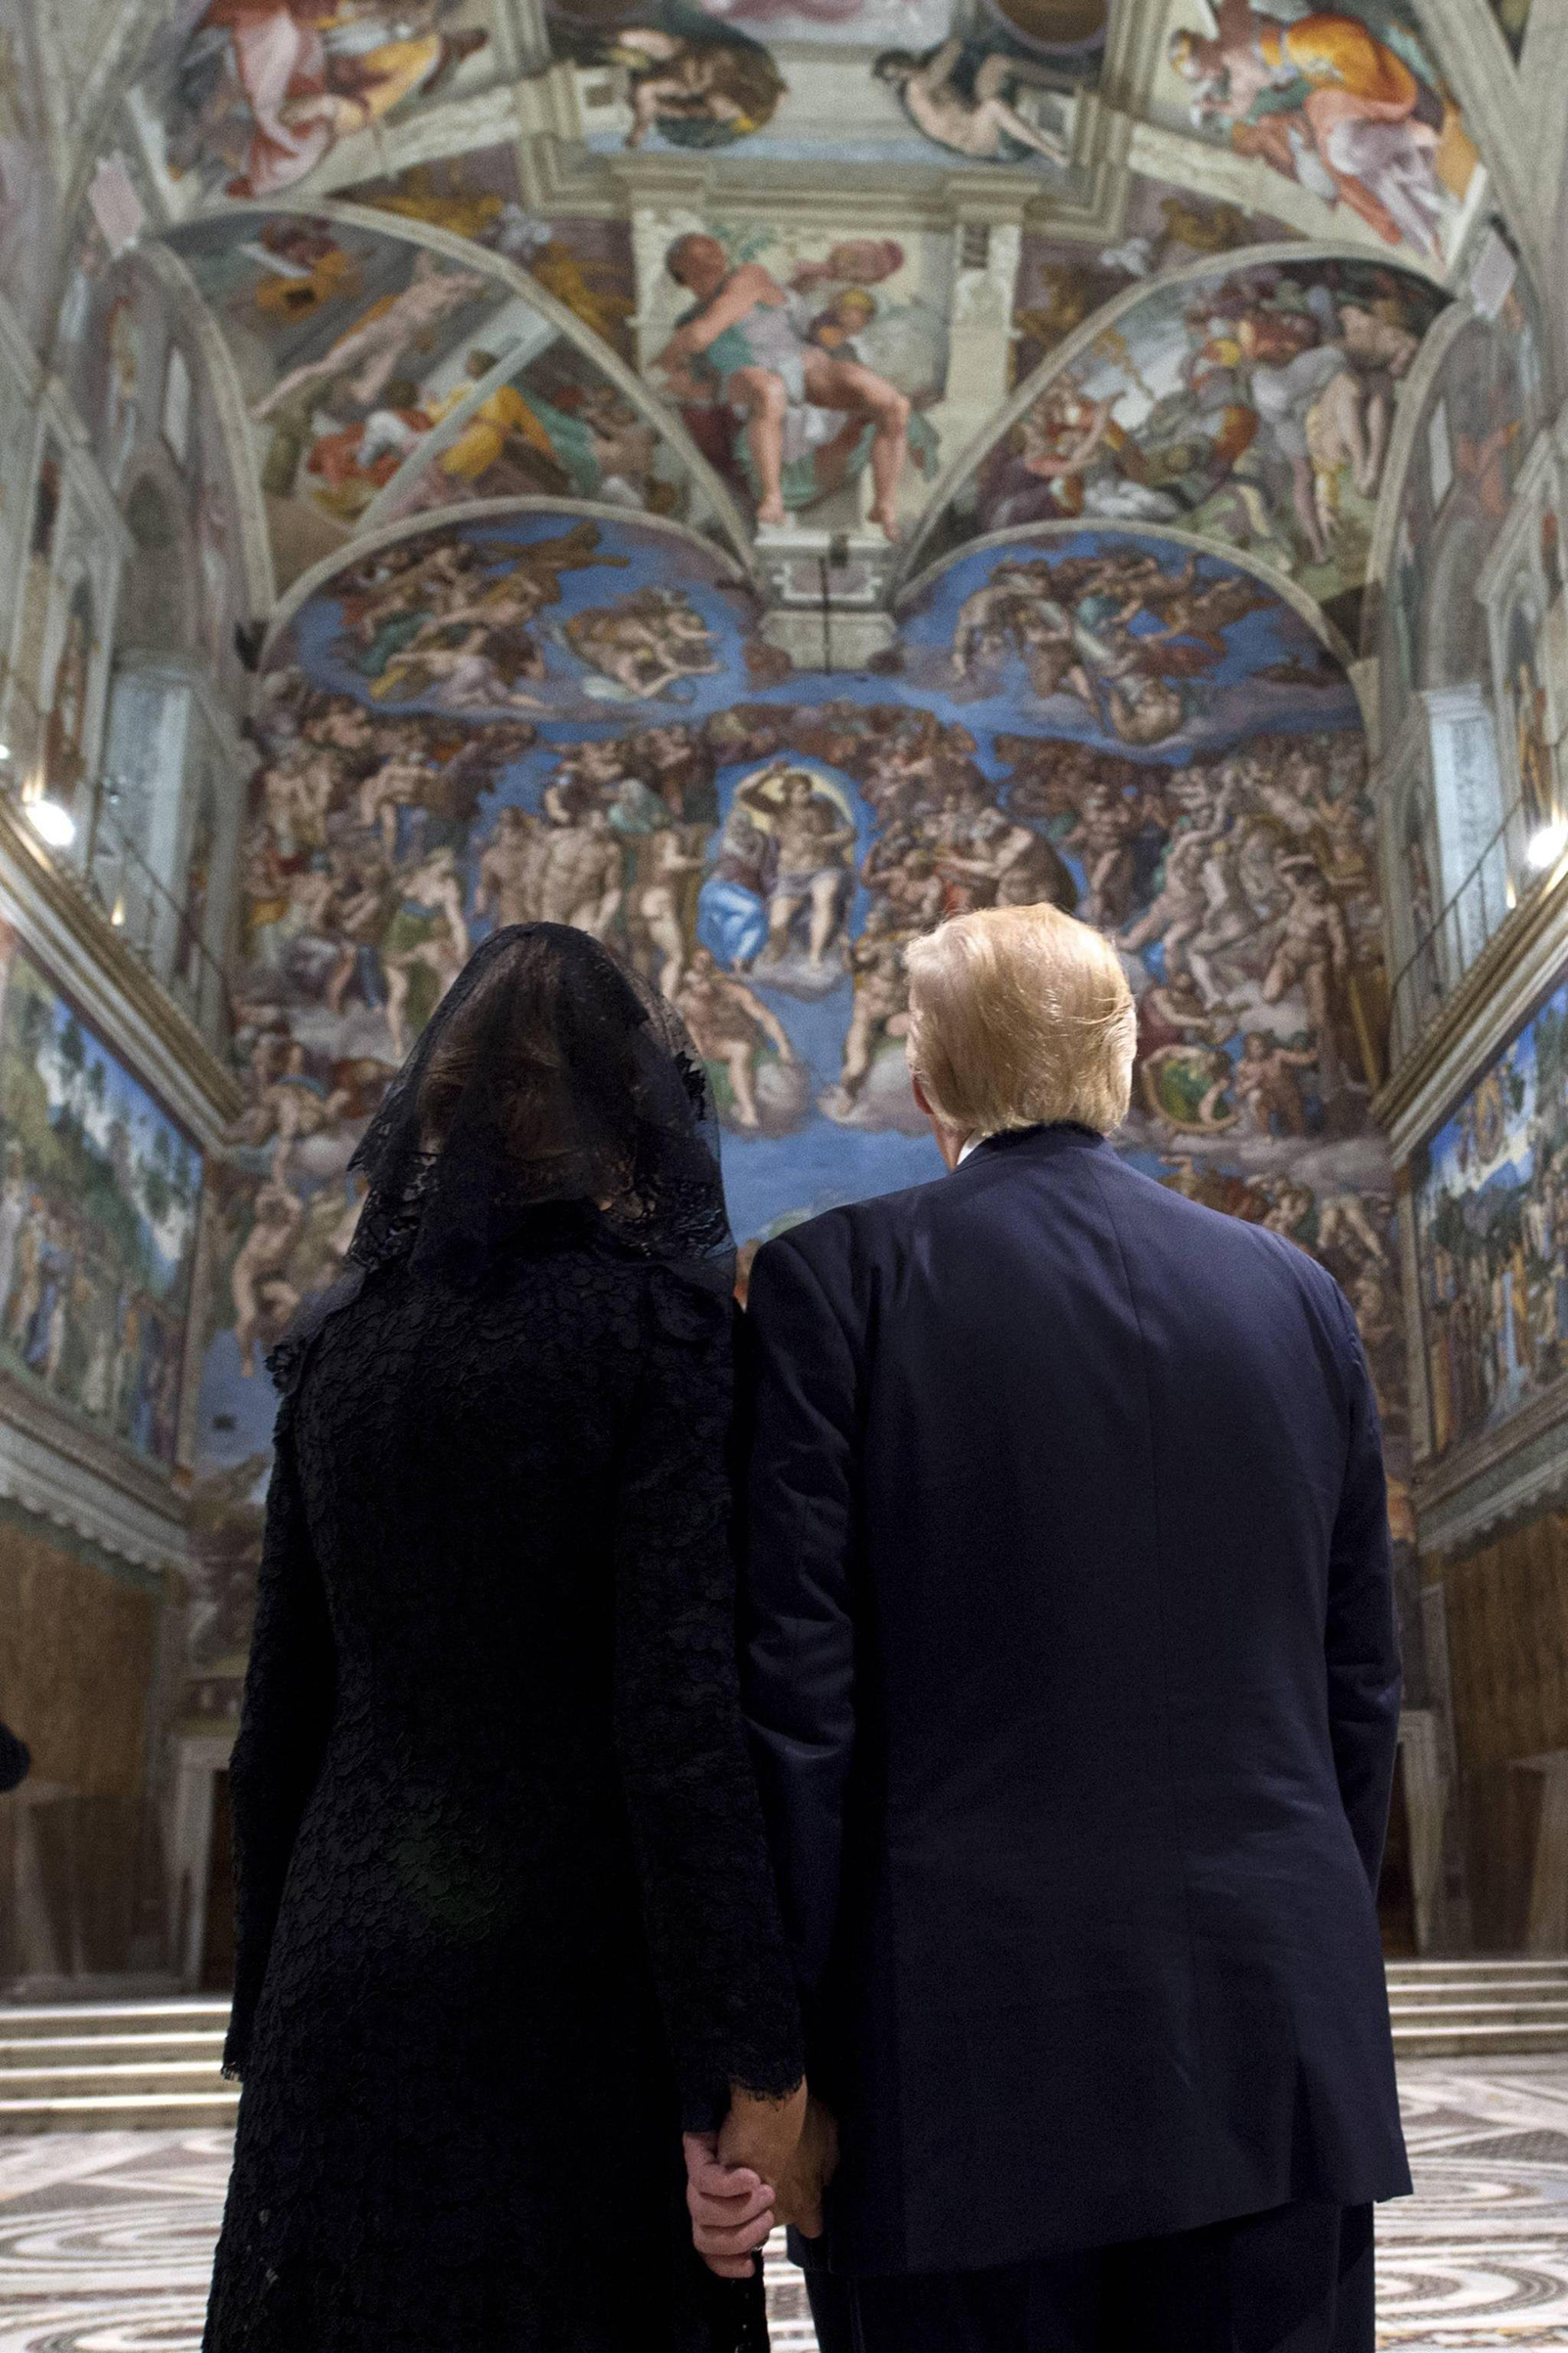 President Trump and First Lady Melania Trump admire the frescoed ceilings during their visit to the Sistine Chapel at the Vatican on May 24, 2017.